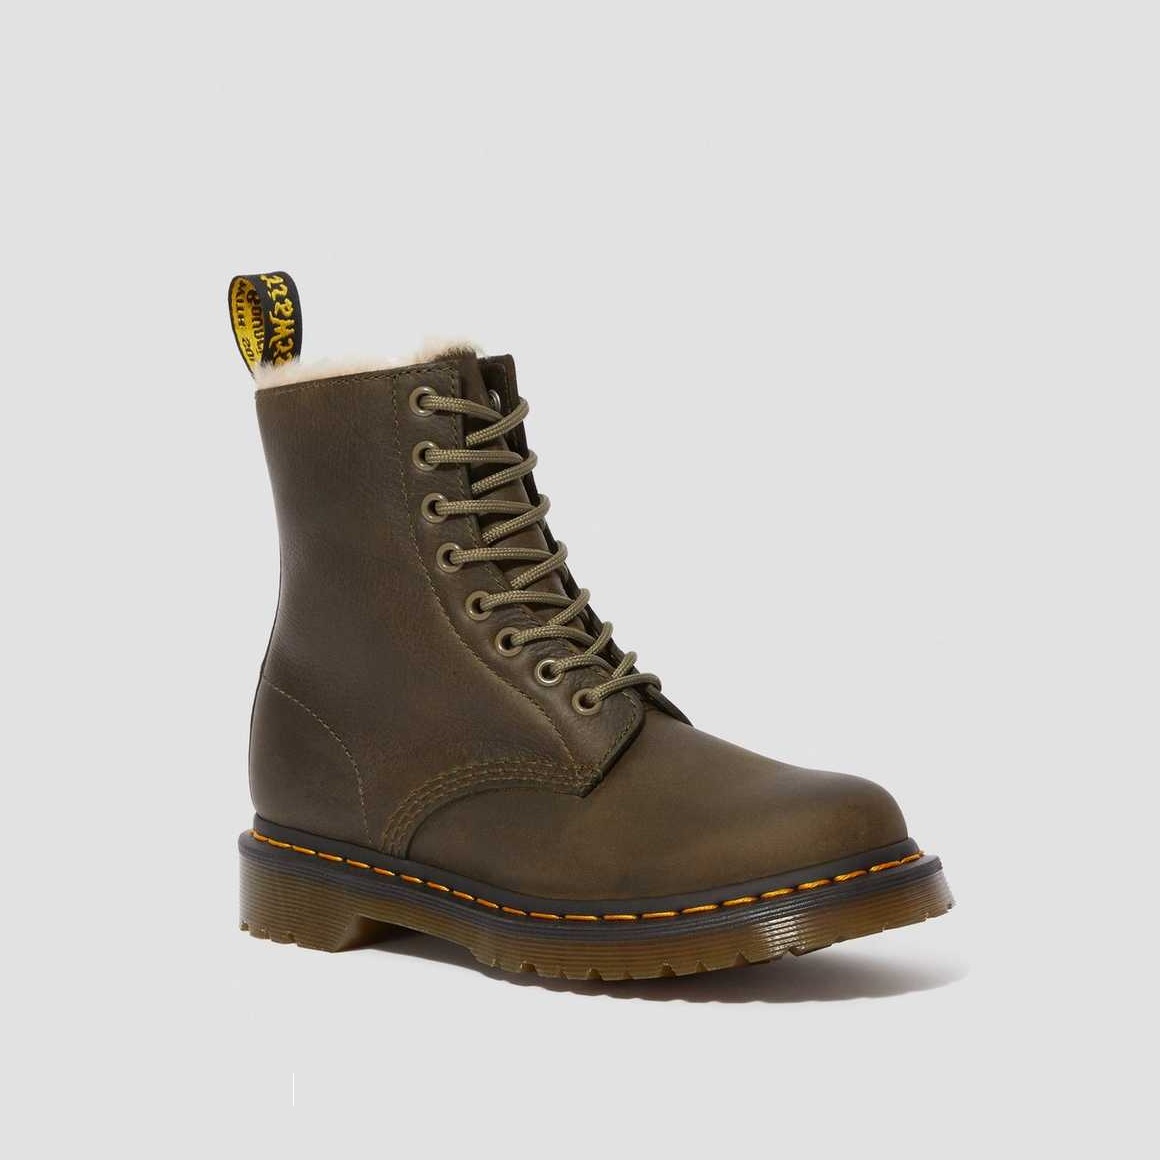 Dr Martens: 30% OFF Selected Items on Black Friday